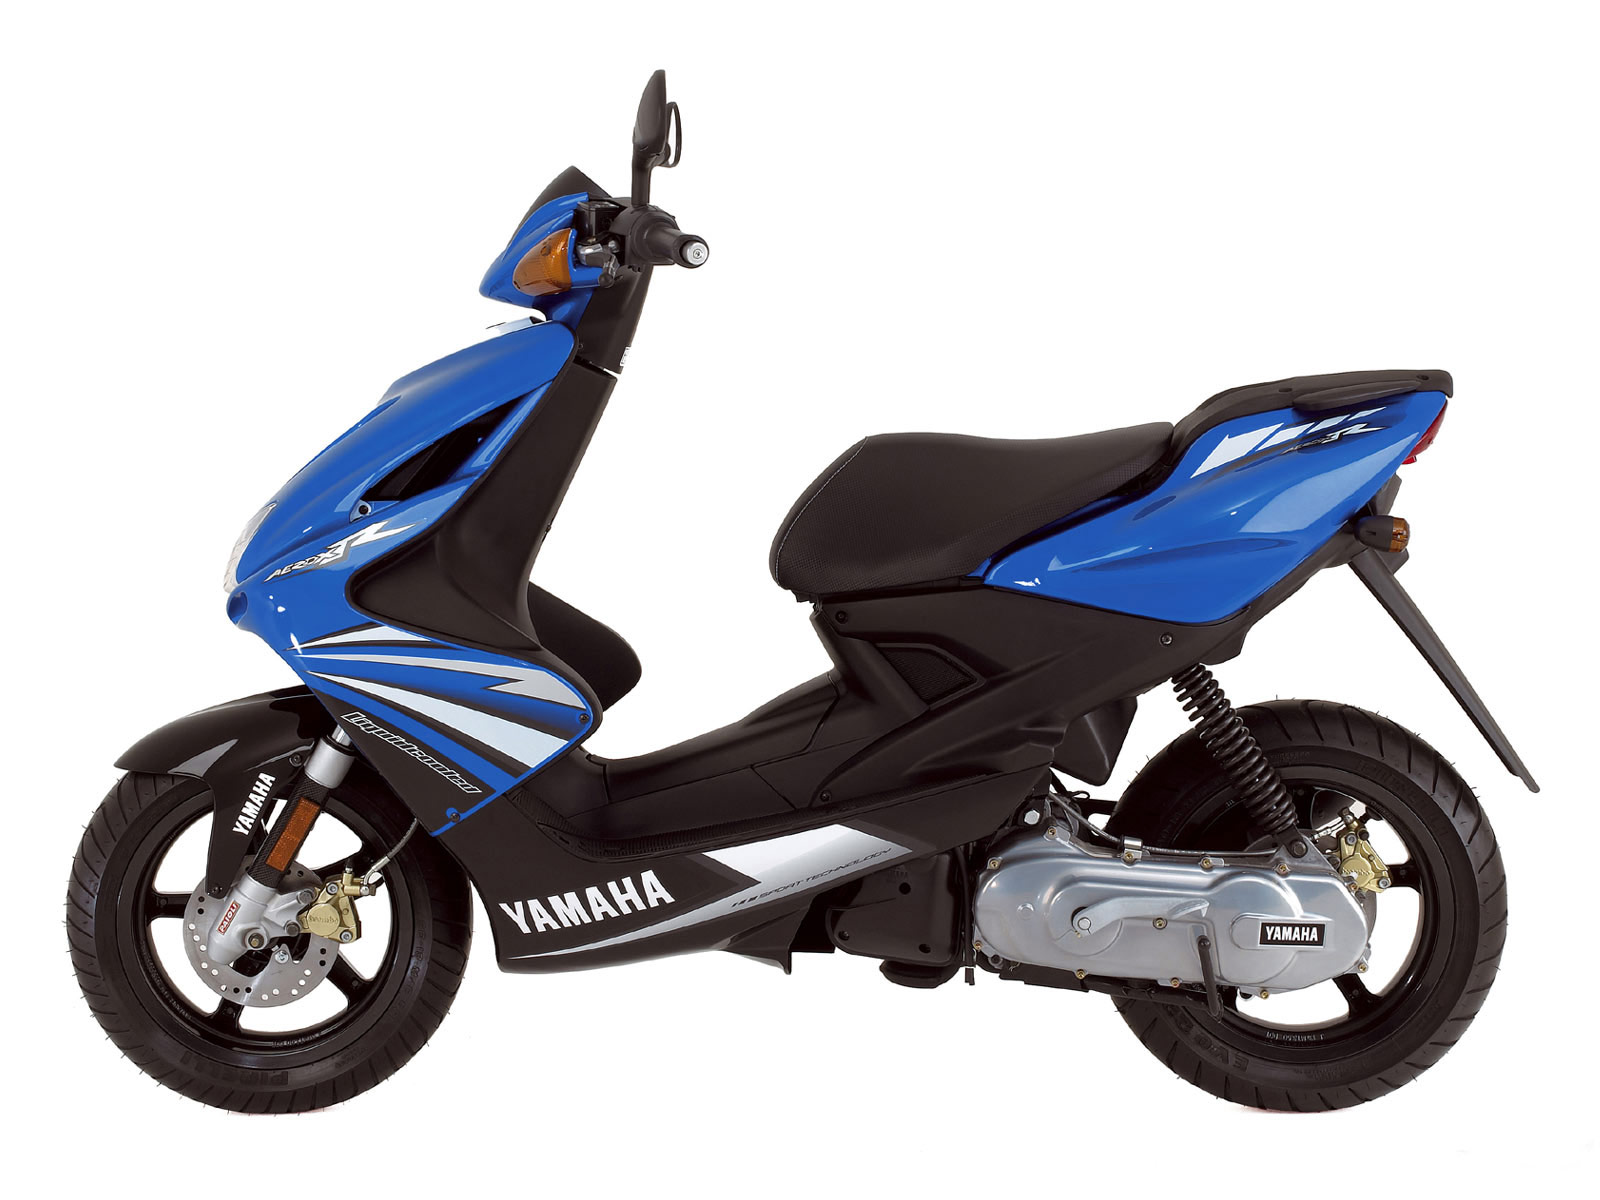 2007 YAMAHA Aerox R Scooter pictures, specifications